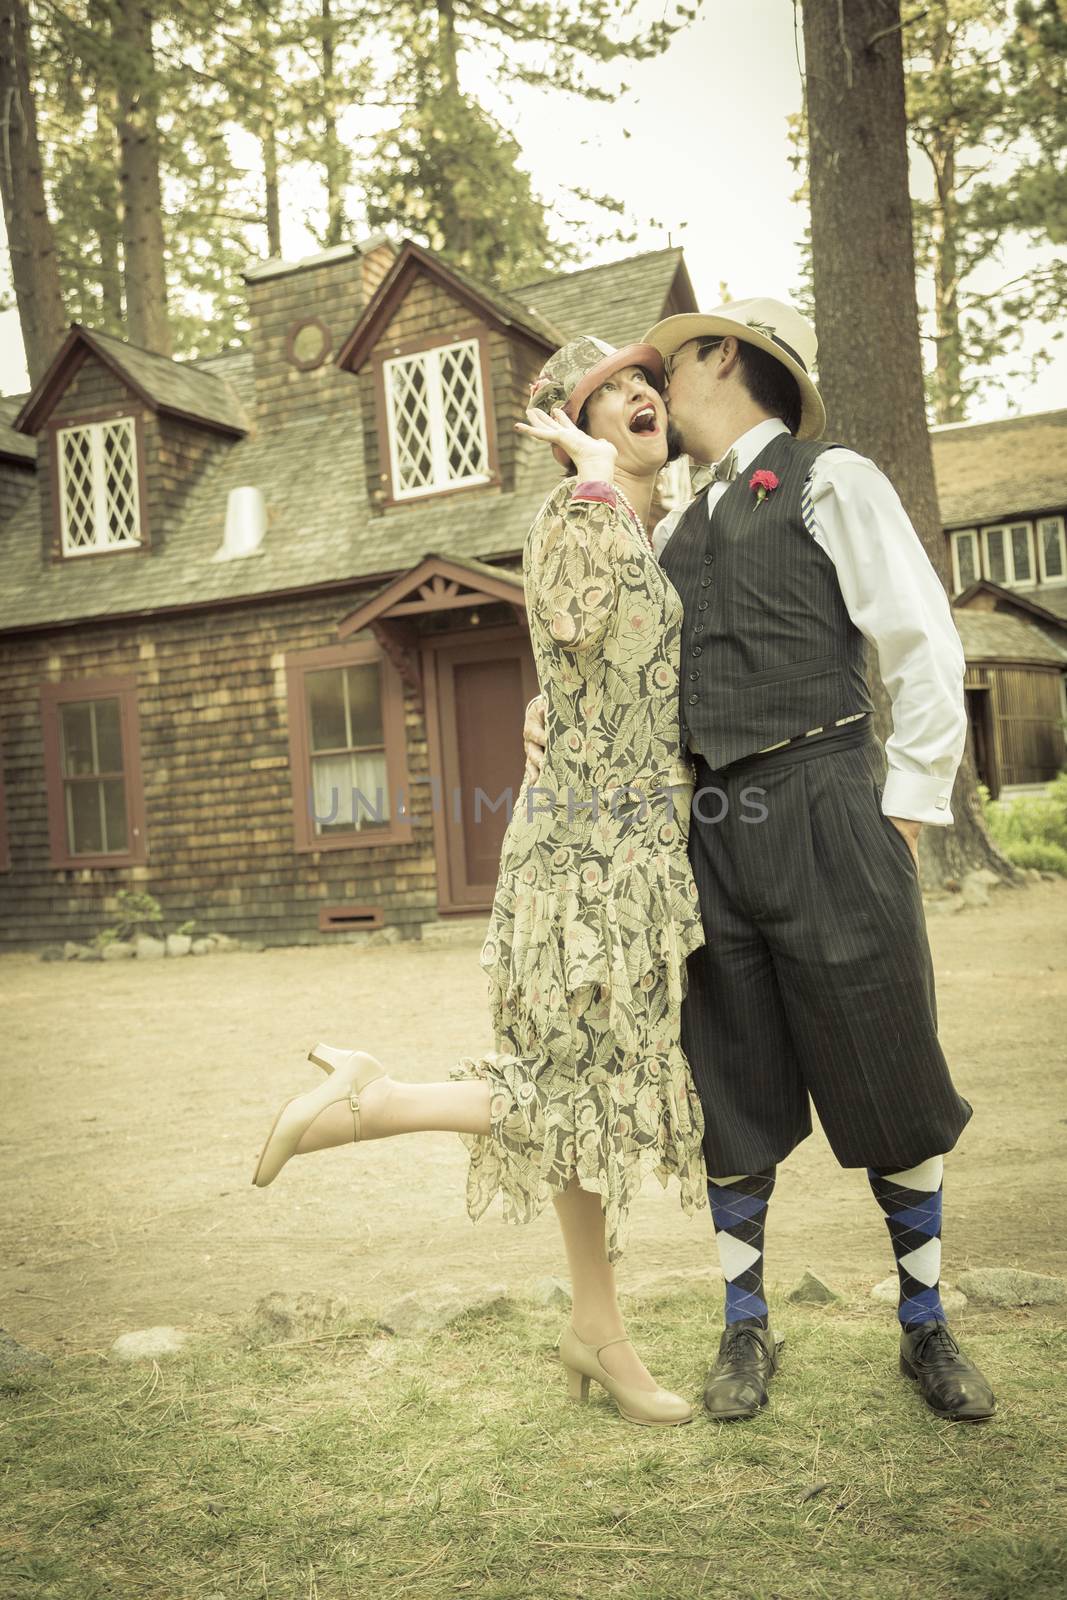 Attractive 1920s Dressed Romantic Couple in Front of Old Cabin Portrait.